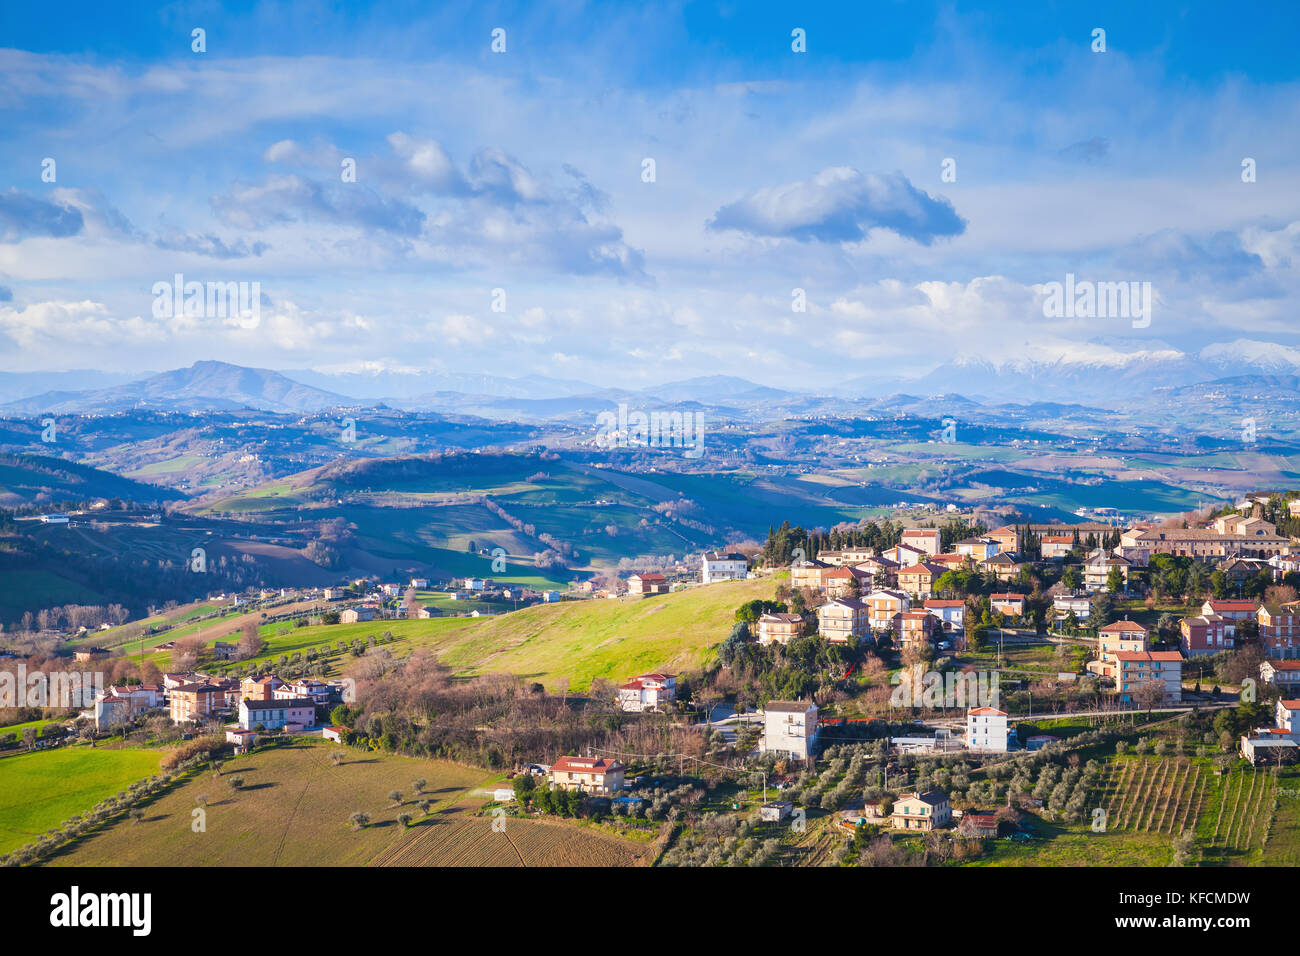 Panoramic landscape of Italian countryside. Province of Fermo, Italy. Village on hills under blue cloudy sky Stock Photo